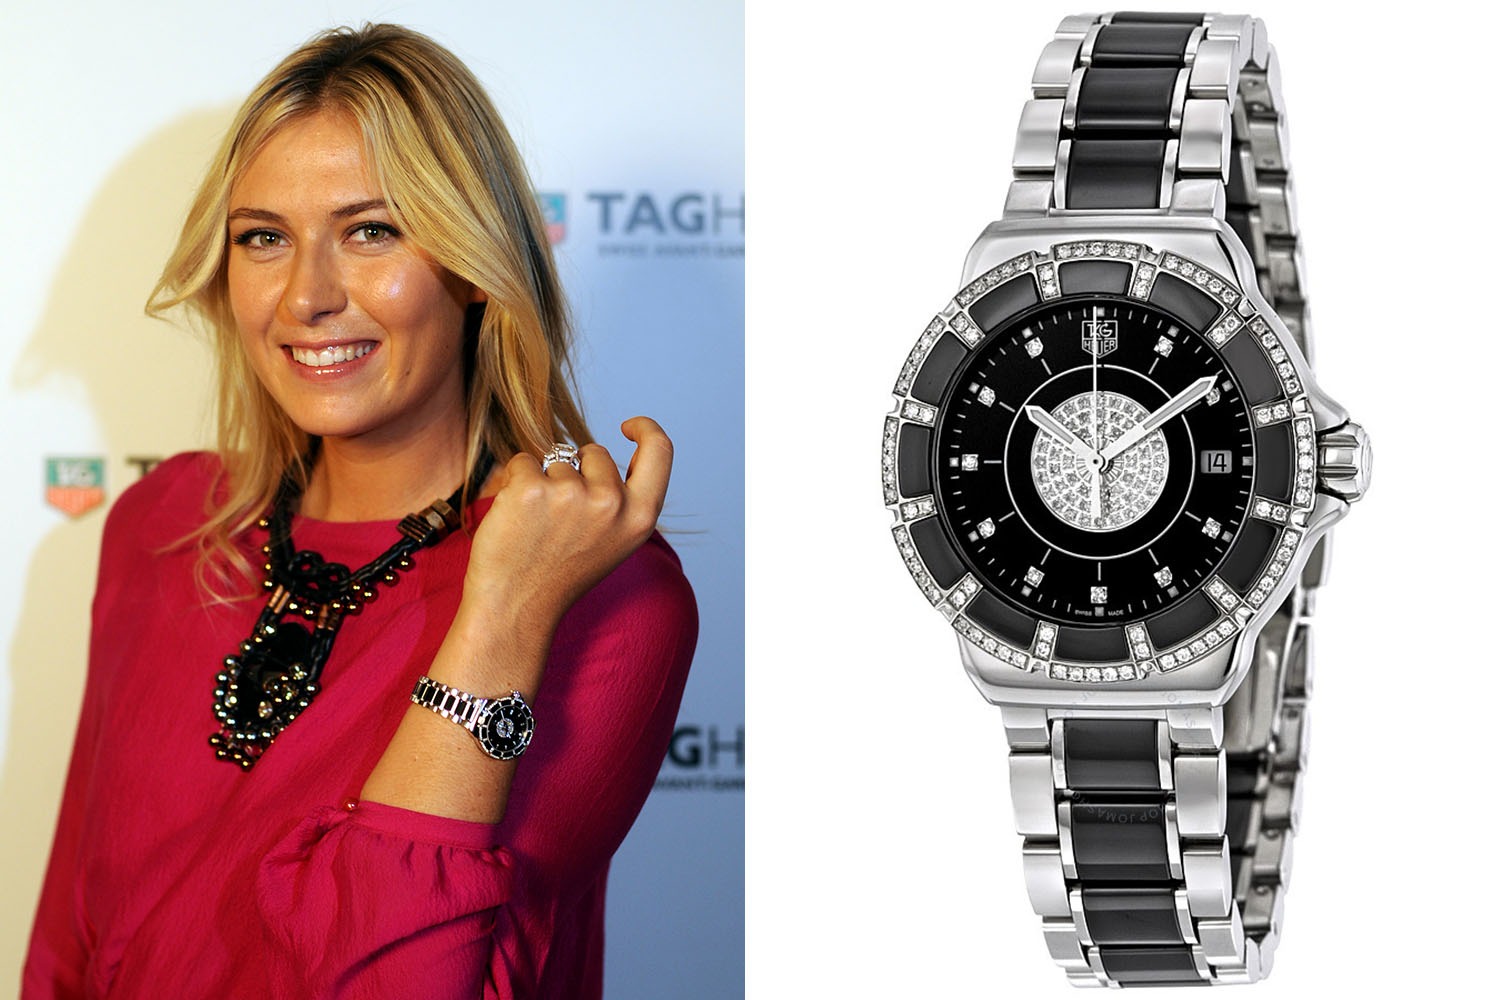 Maria Sharapova was formerly an ambassador for TAG Heuer before her drug ban, and wore a £1,900 Formula 1 Lady watch